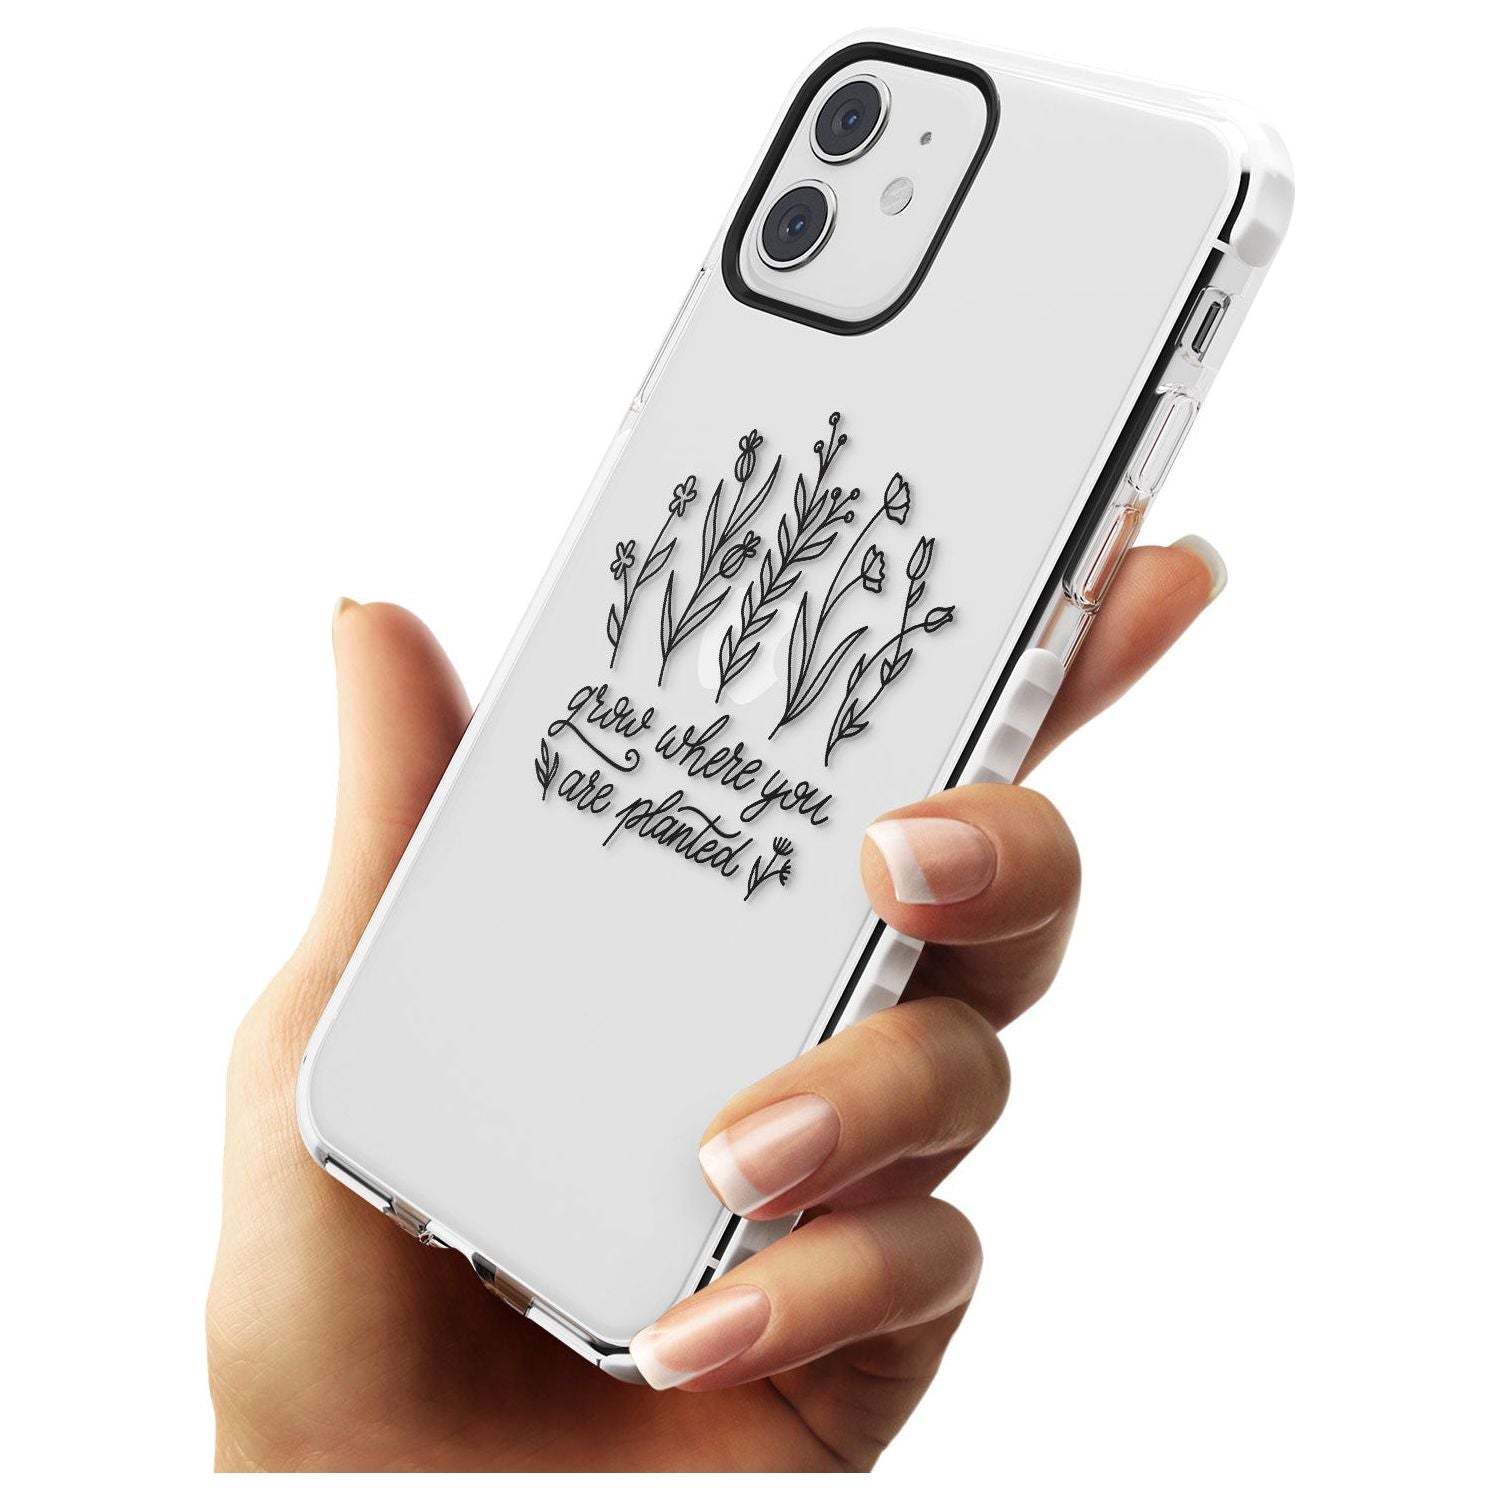 Grow where you are planted Impact Phone Case for iPhone 11